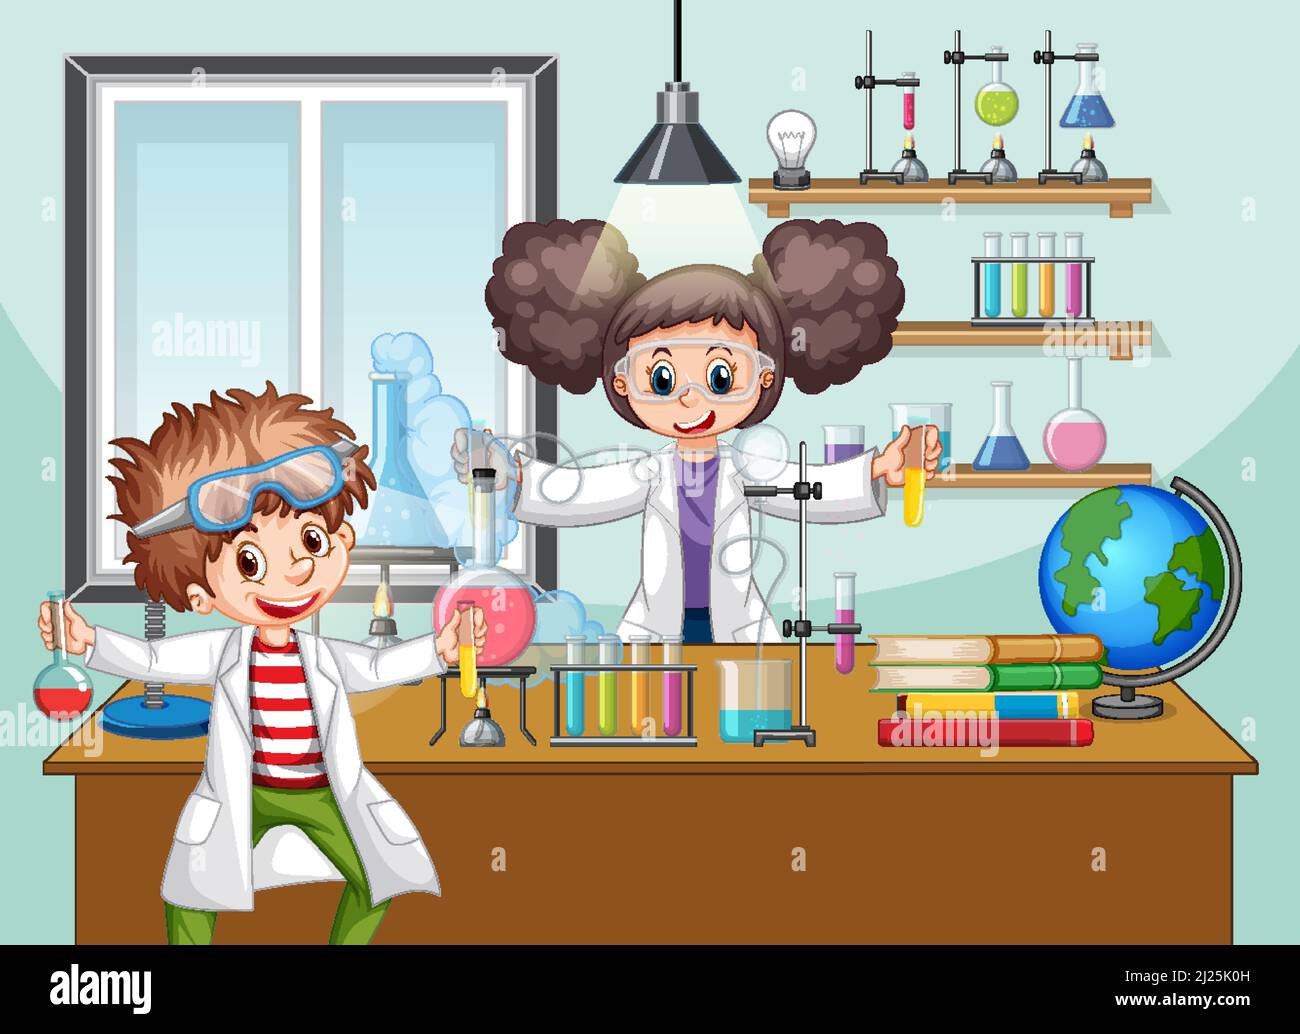 Classroom scene with scientist doing experiment illustration Stock Vector